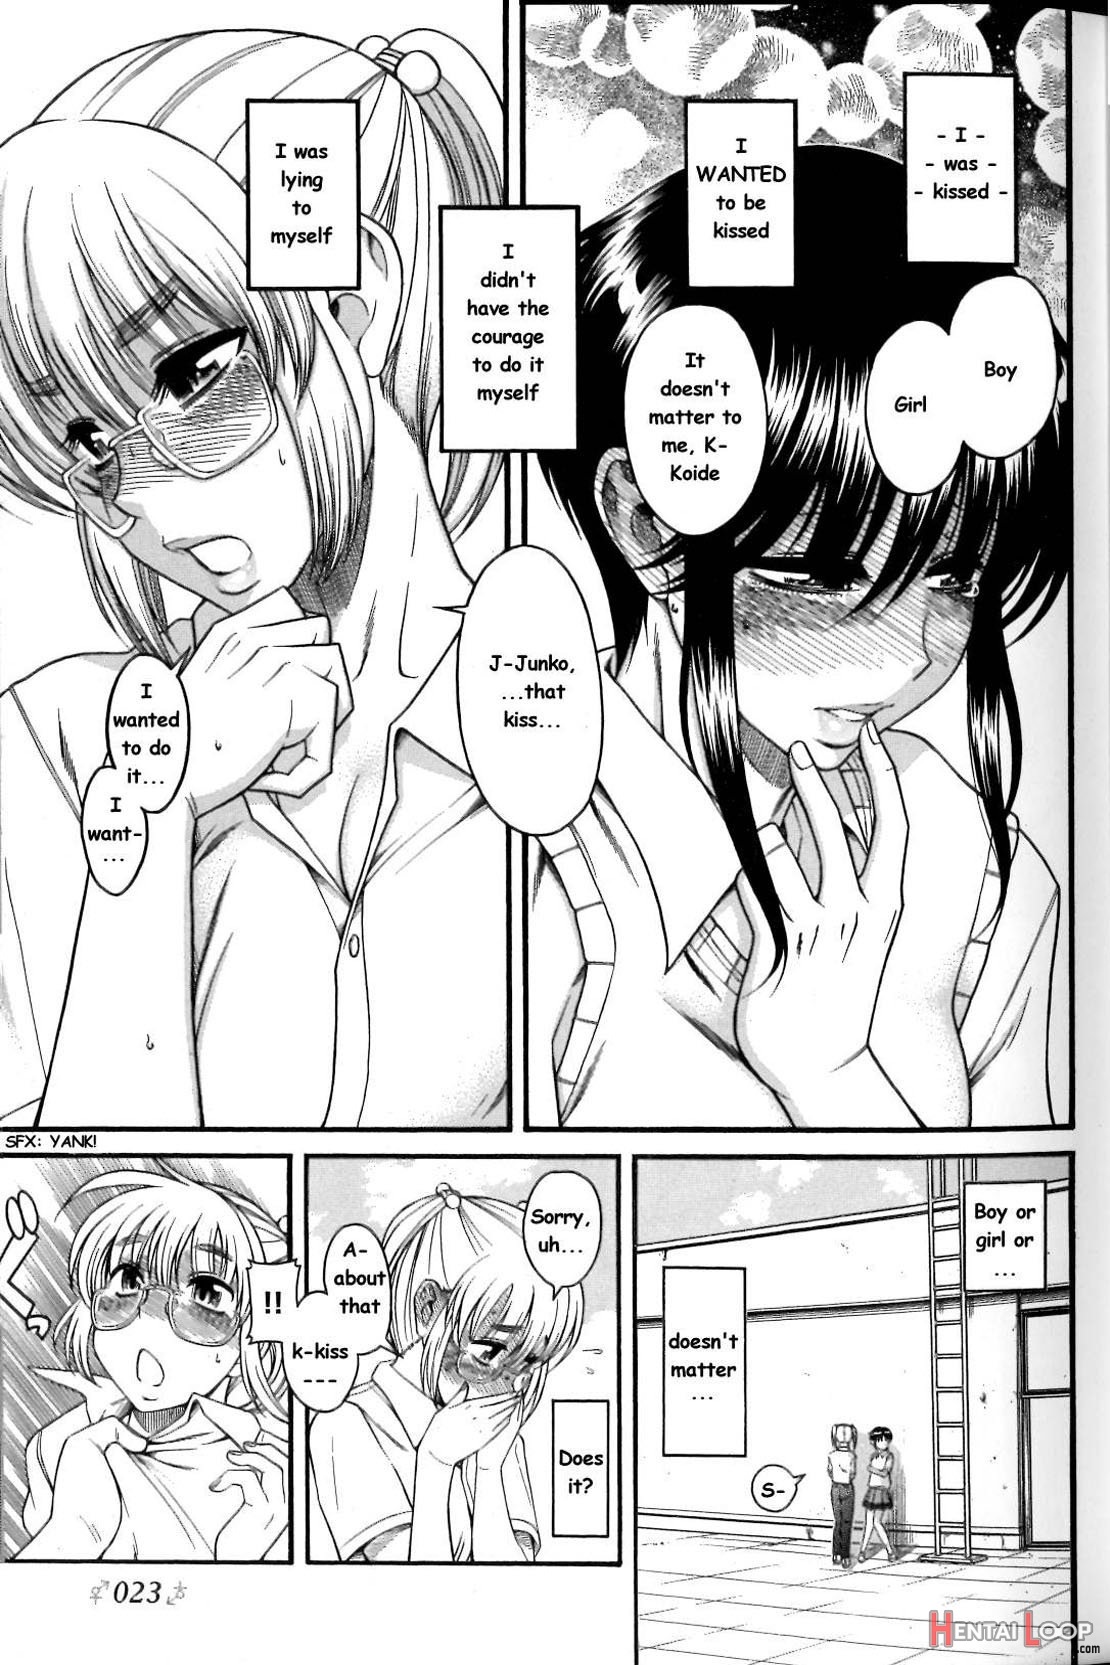 Boy Meets Girl, Girl Meets Boy 2- Single Page Version page 23